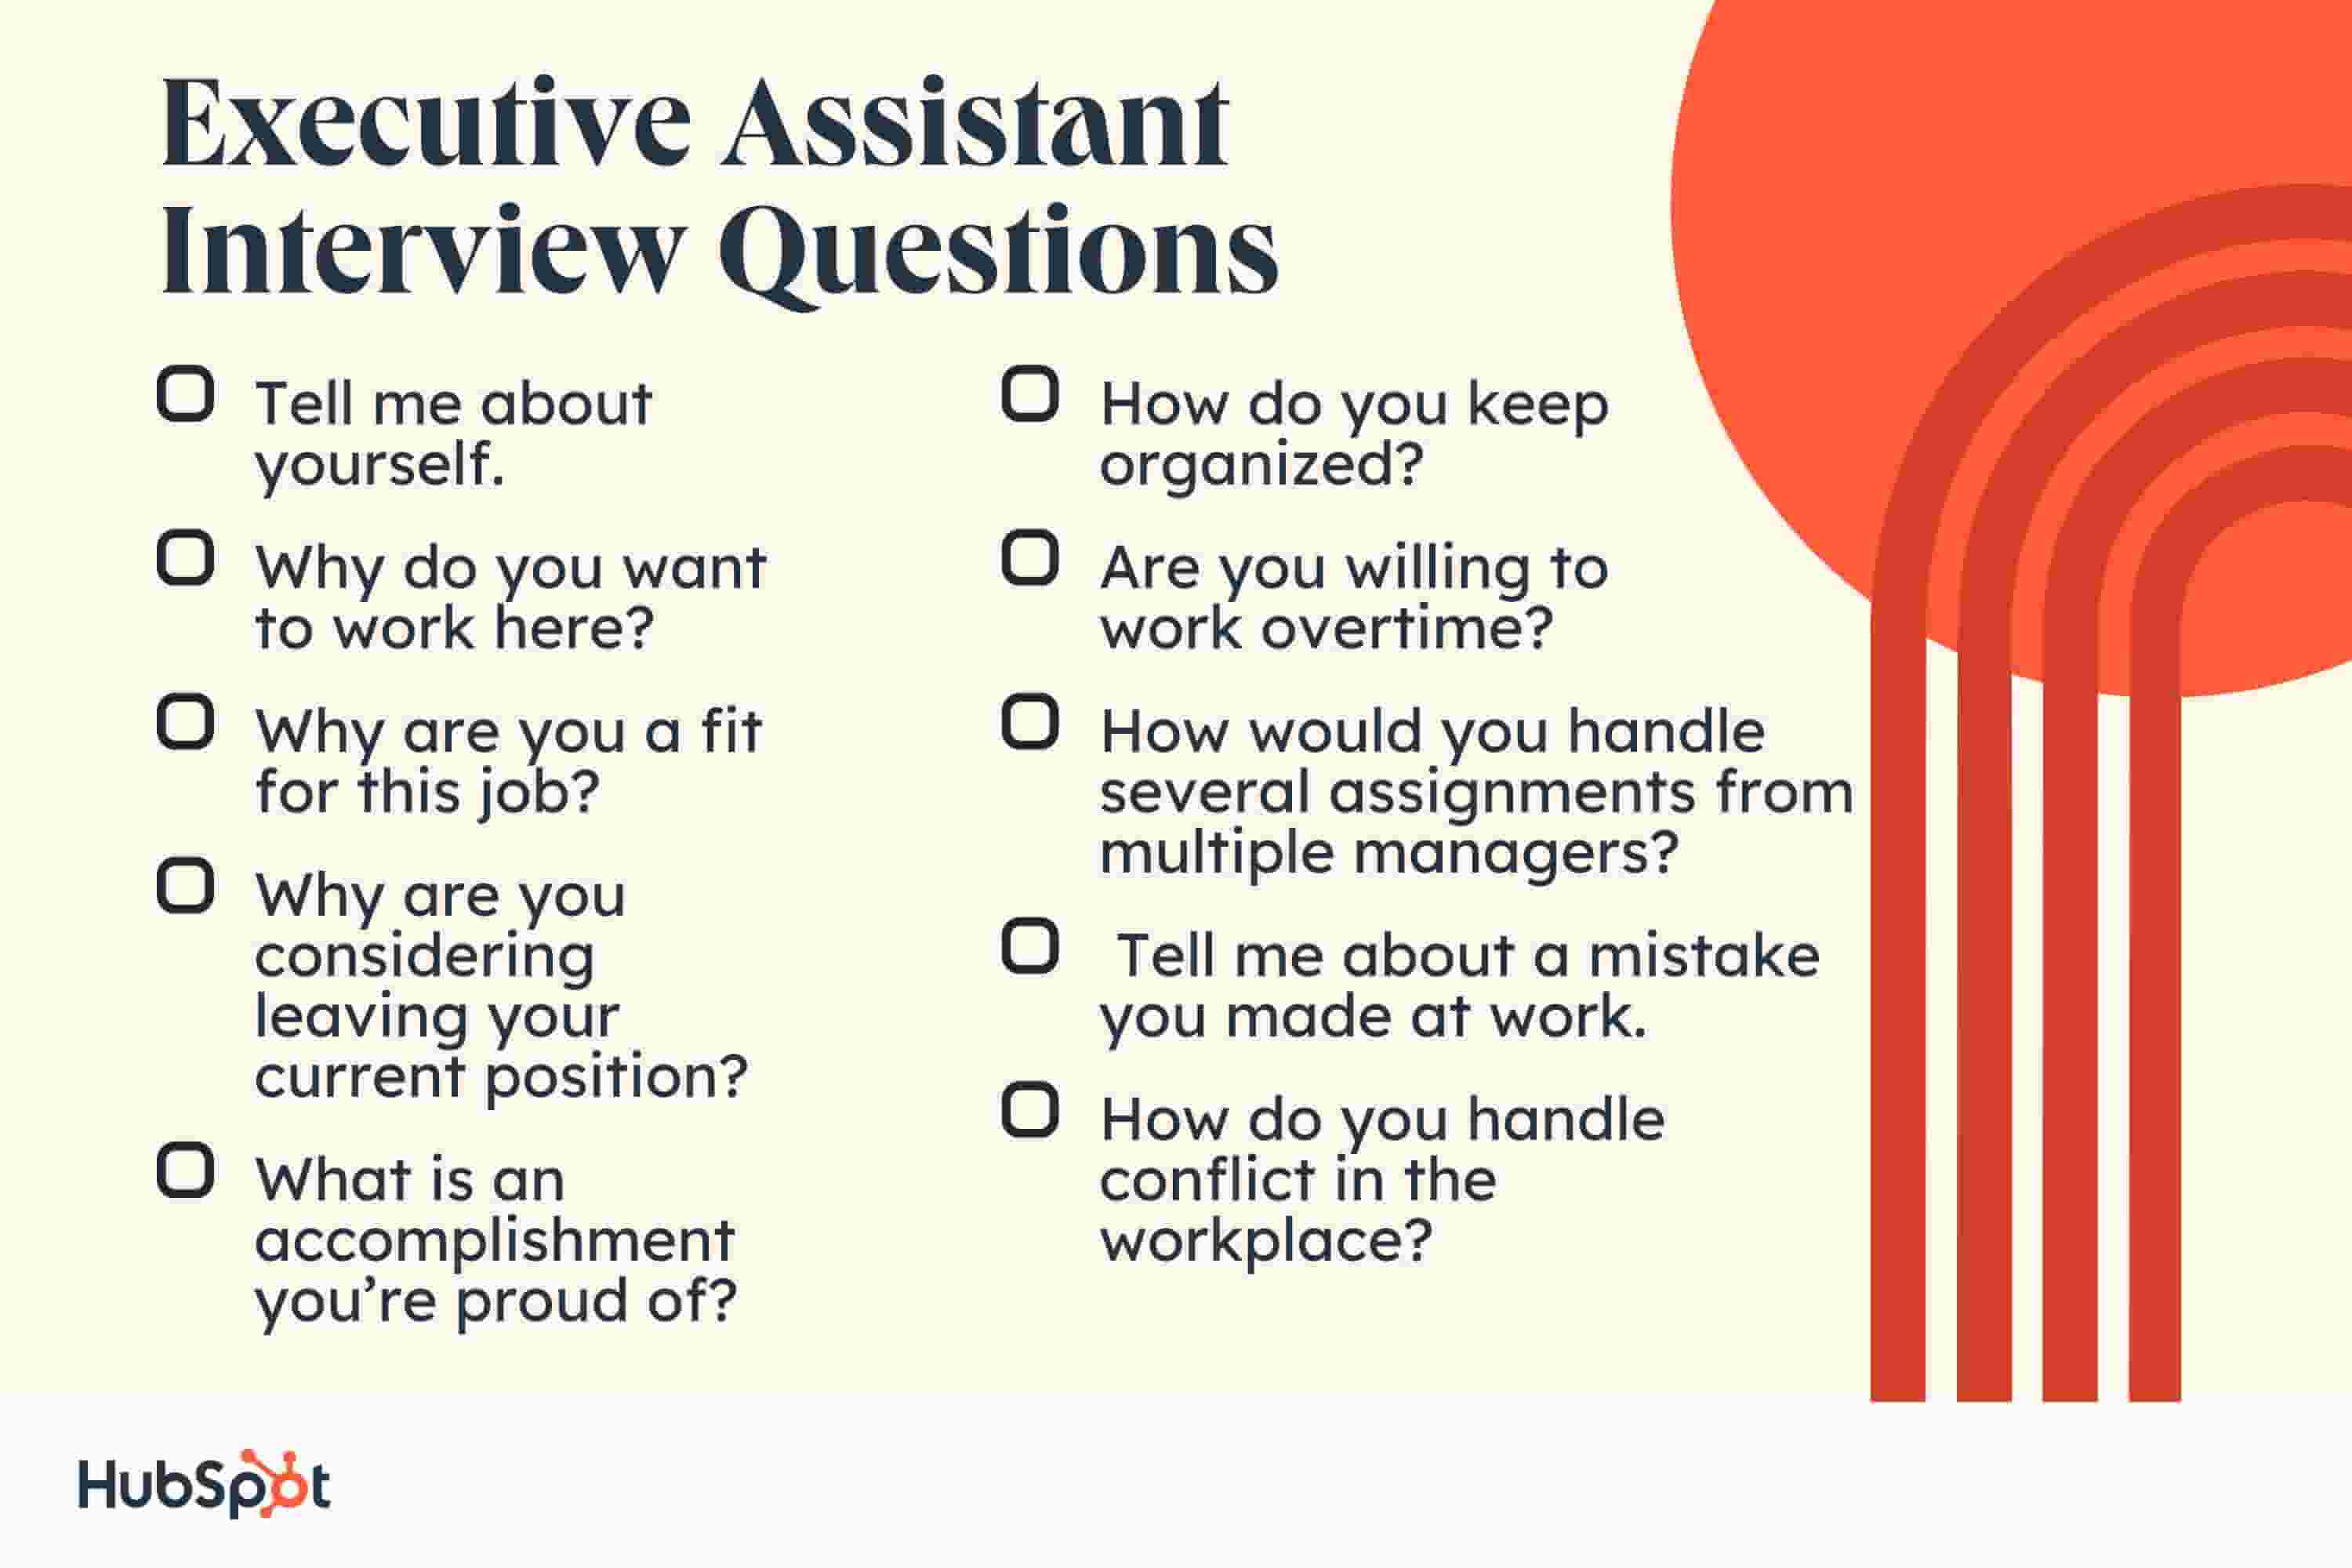 Executive Assistant Interview Questions. Tell me about yourself. Why do you want to work here? Why are you a fit for this job? Why are you considering leaving your current position? What is an accomplishment you’re proud of? How do you keep organized? Are you willing to work overtime? How would you handle several assignments from multiple managers? Tell me about a mistake you made at work. How do you handle conflict in the workplace?